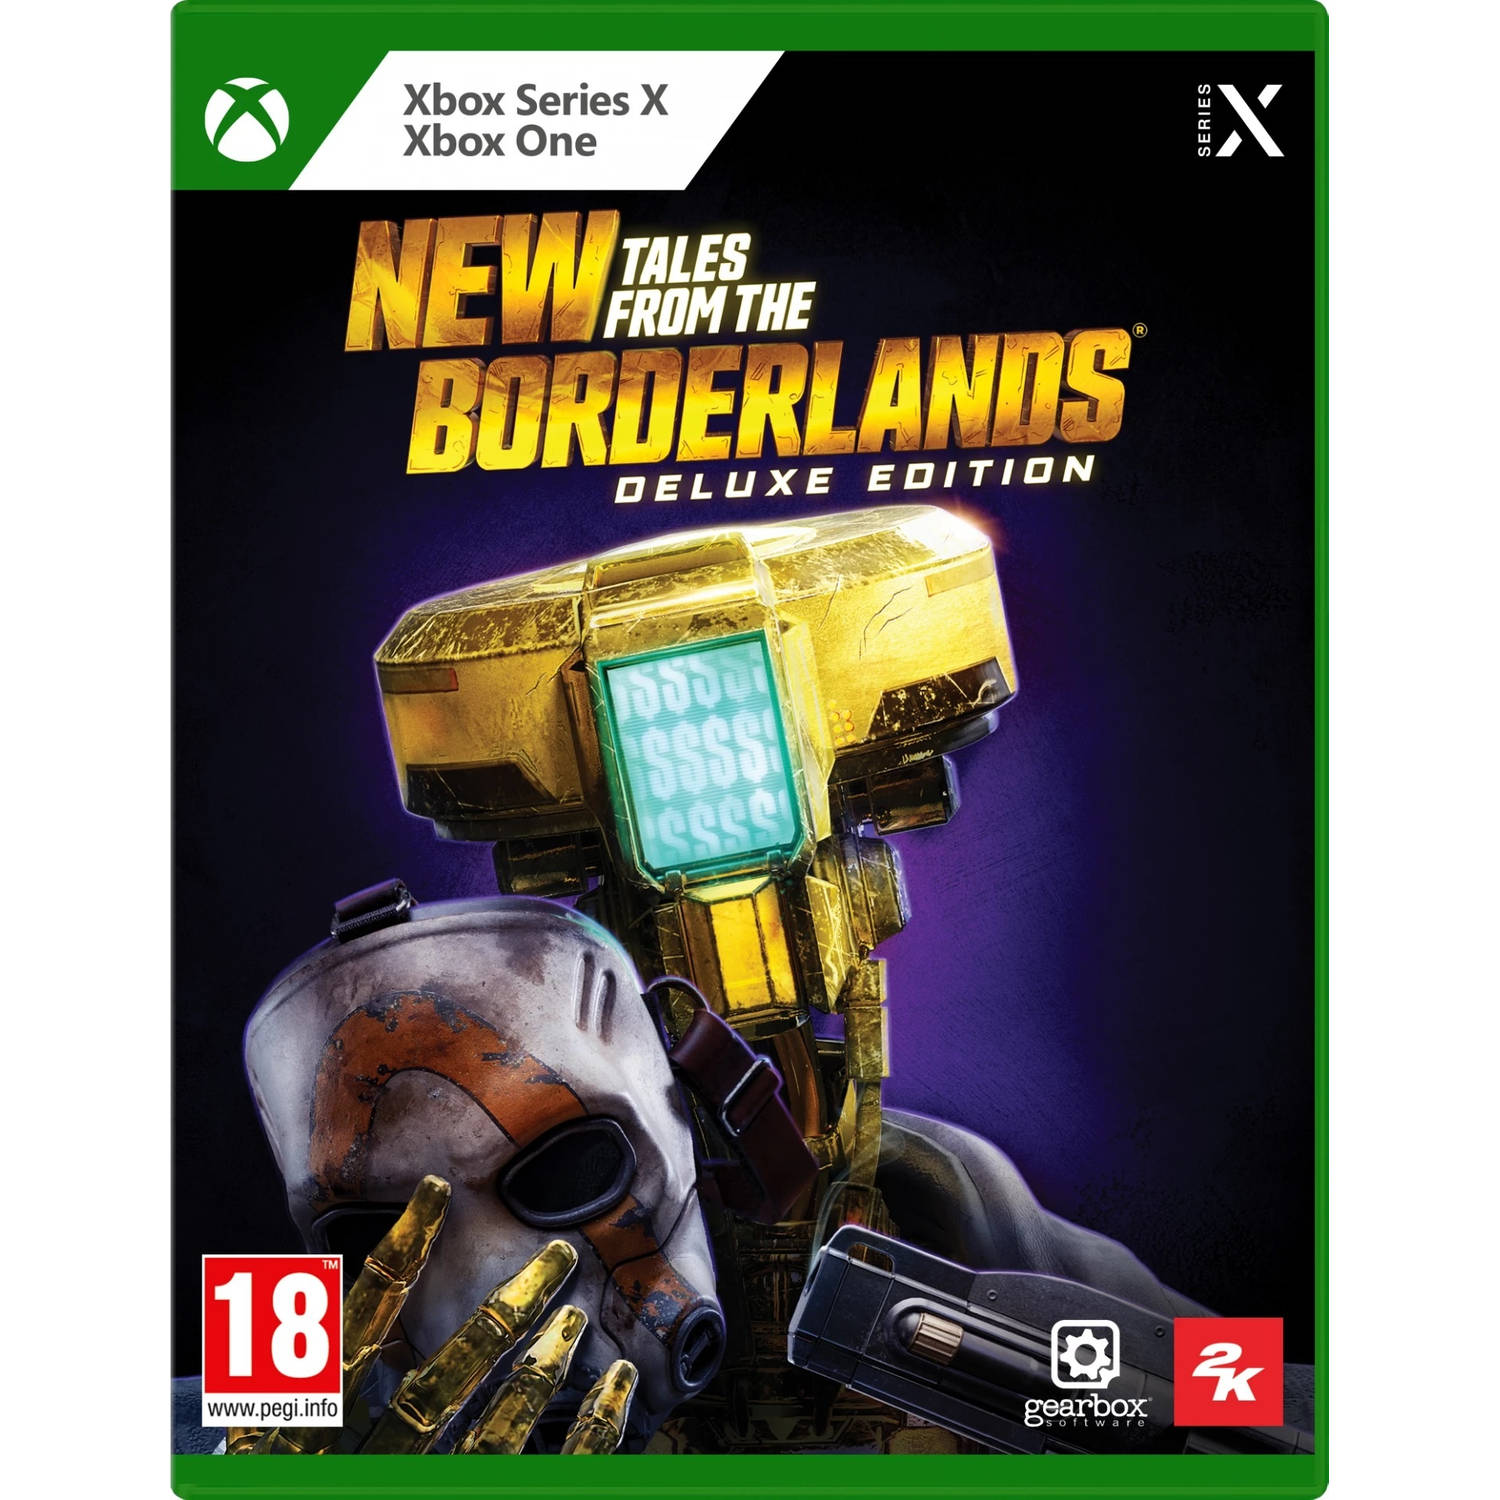 New Tales Of Borderlands (Deluxe Edition). XBOXONE